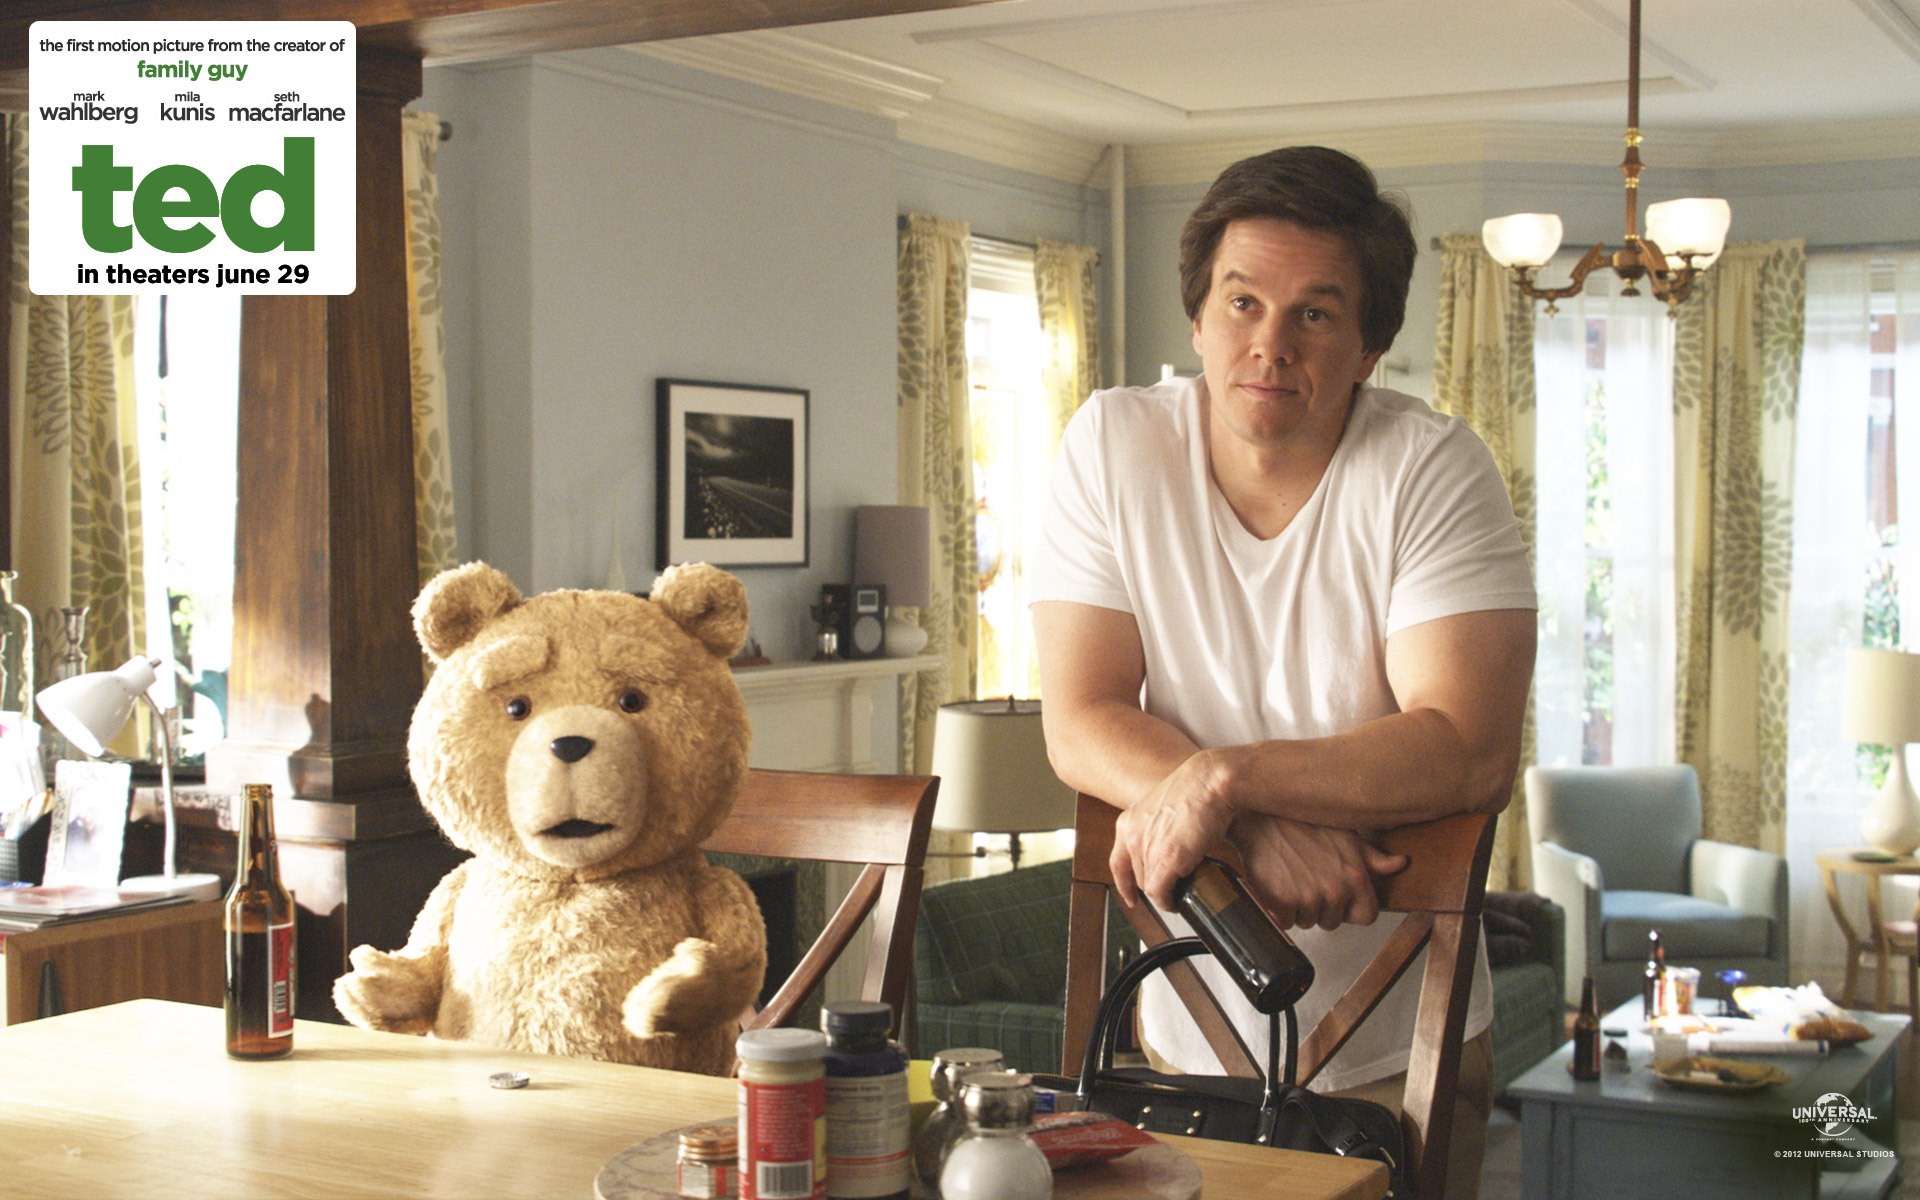 Ted 2012 HD movie wallpapers #3 - 1920x1200